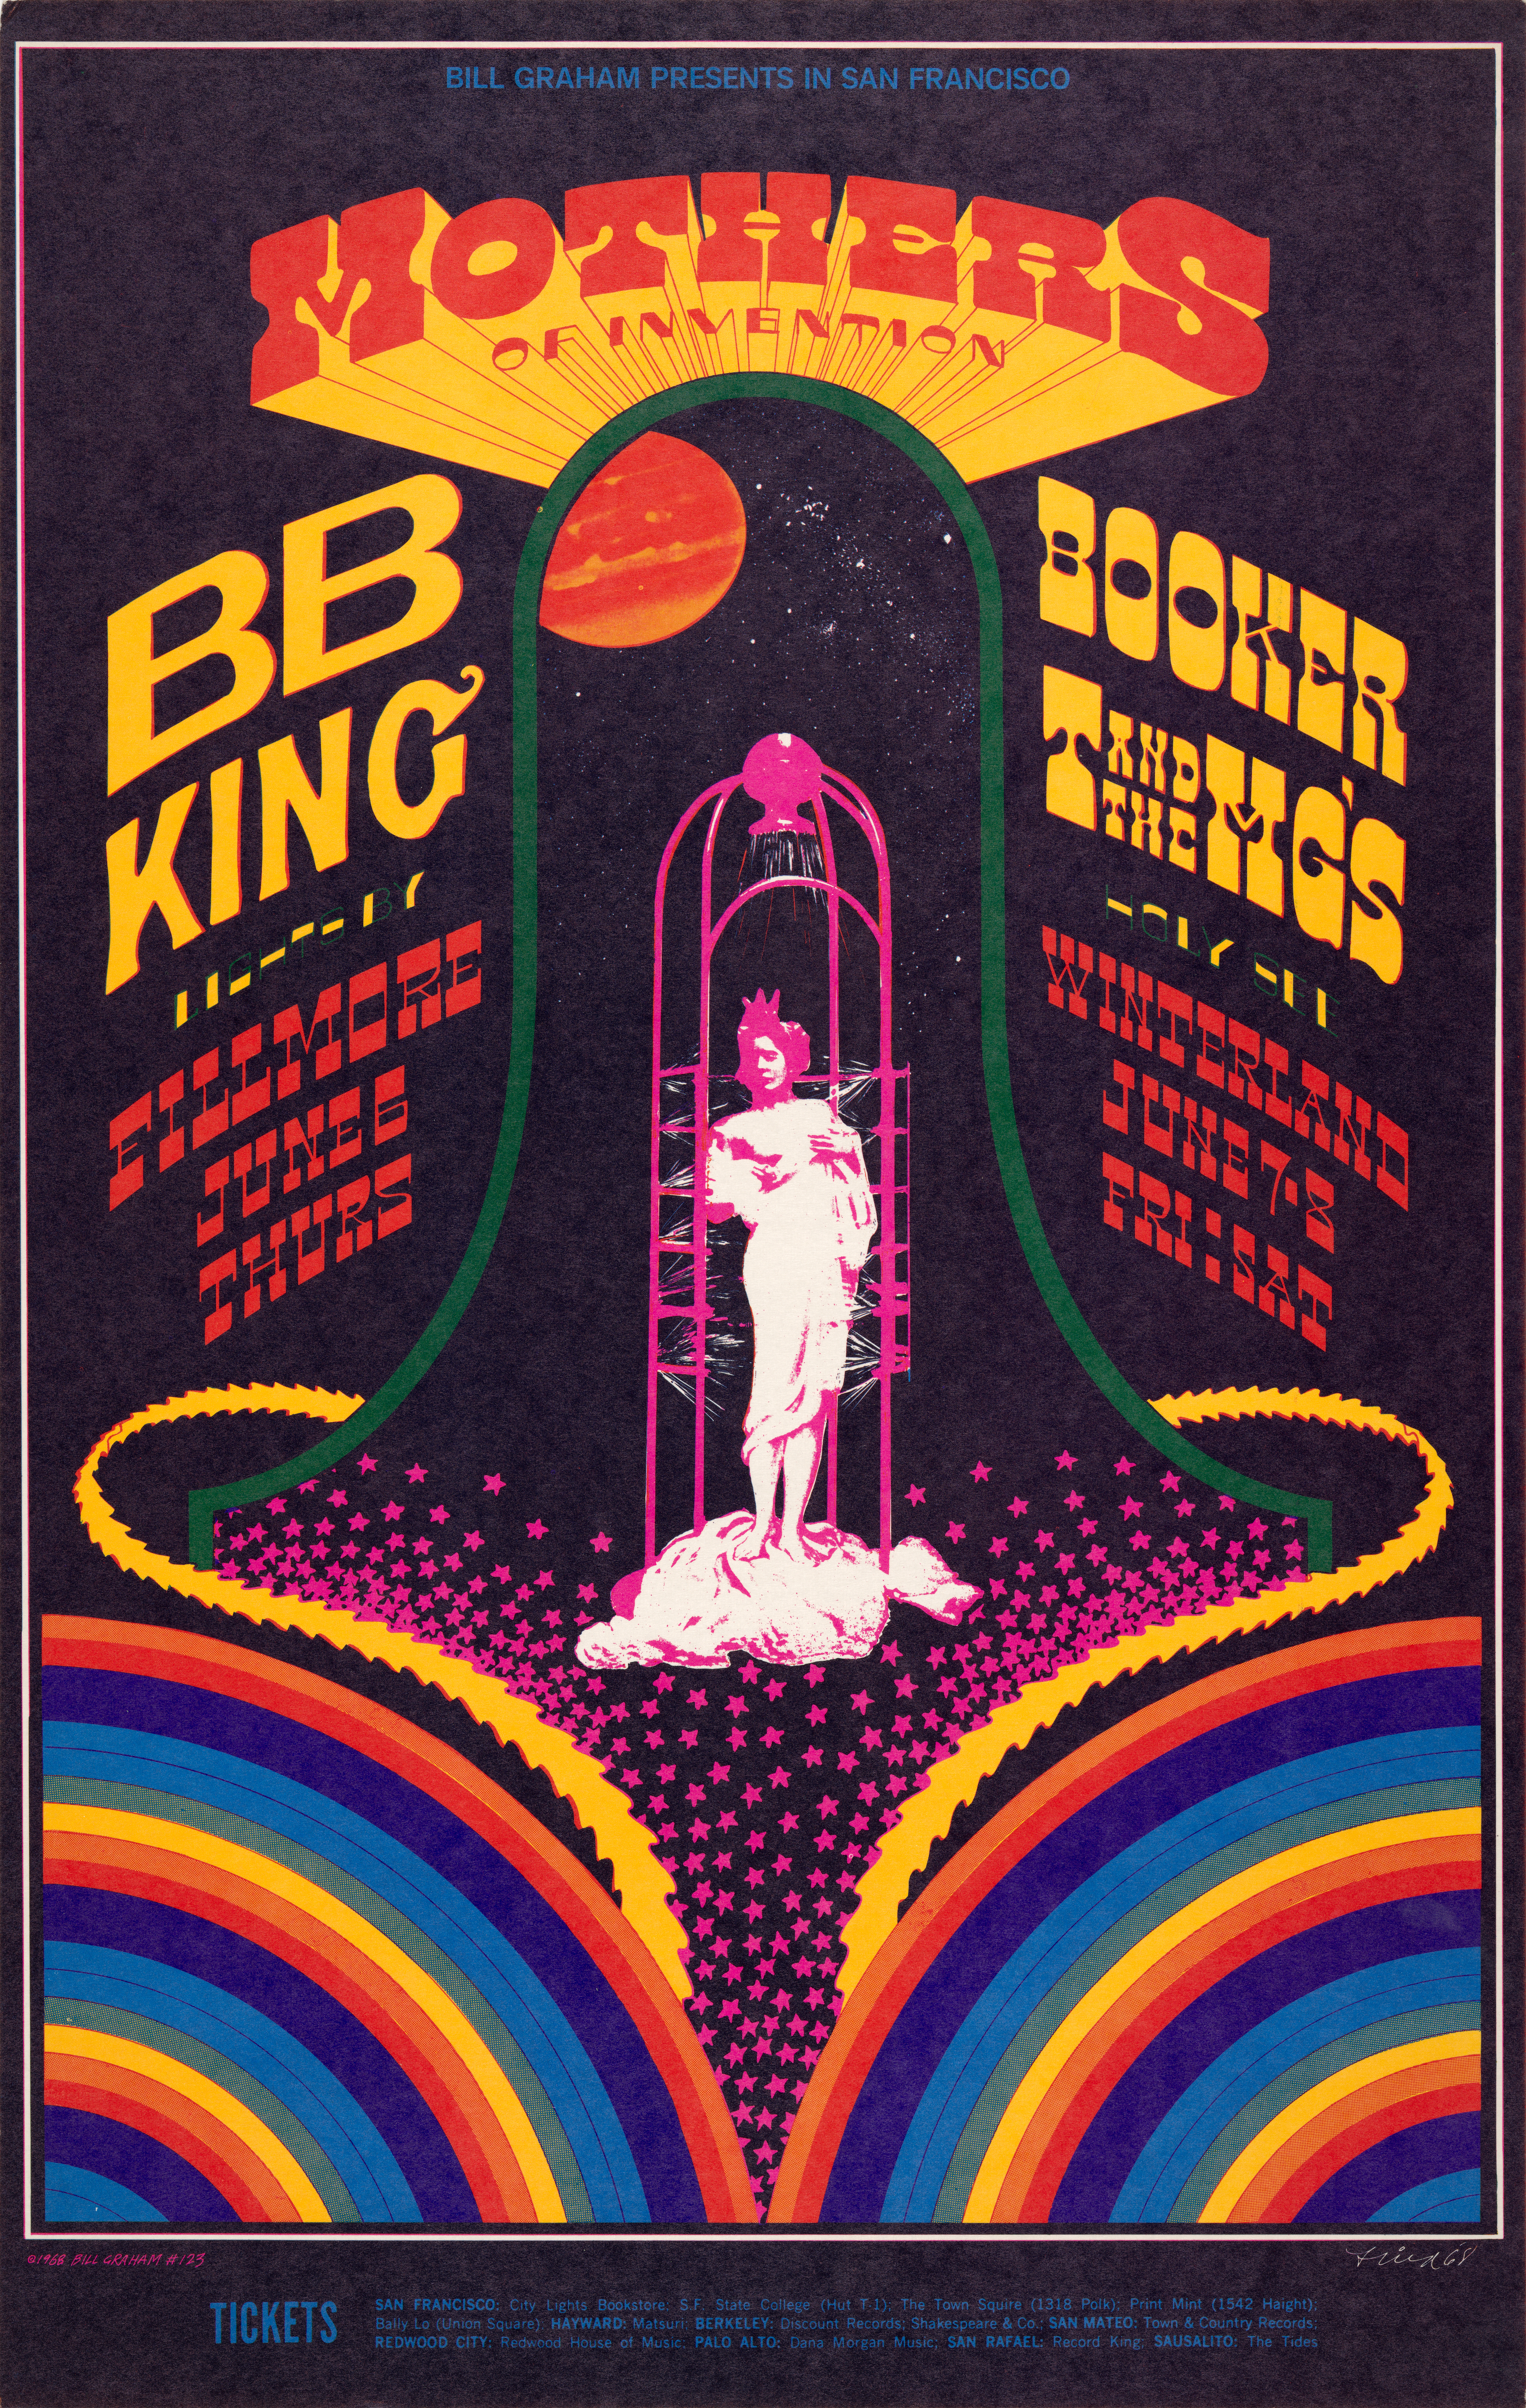 Mothers of Invention, B.B. King, Fillmore Auditorium, June 6, 1968 and Winterland, June 7-8, 1968